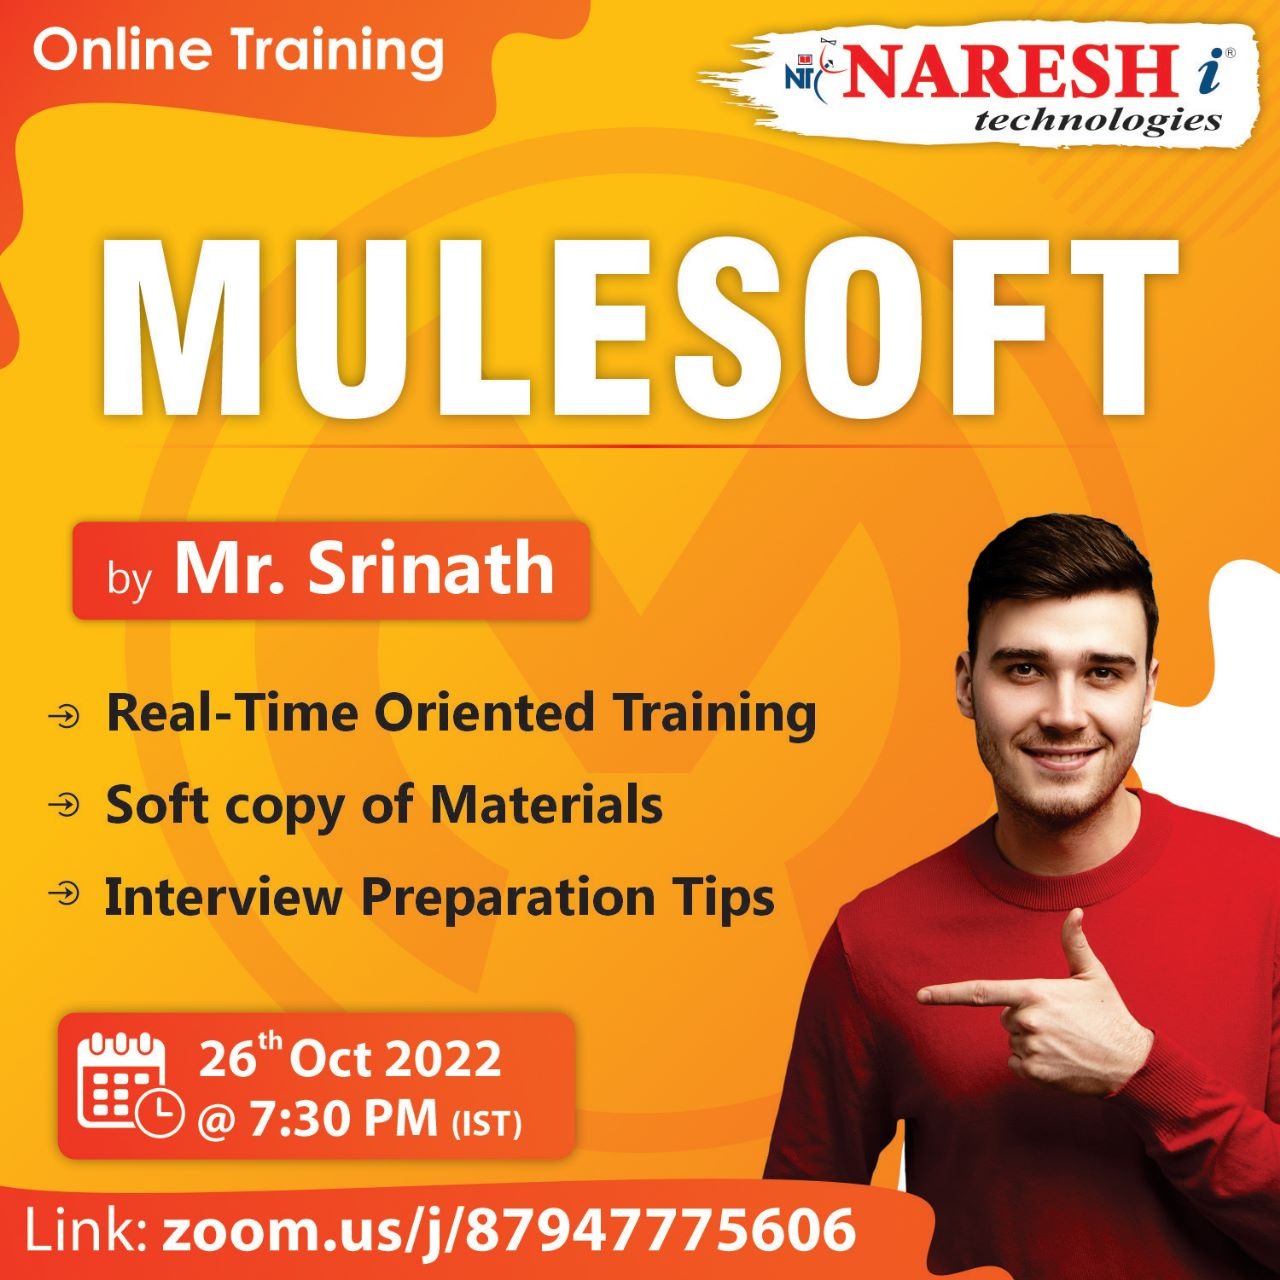 Attend Free Online Demo On MuleSoft by Mr. Srinath in NareshIT, Online Event